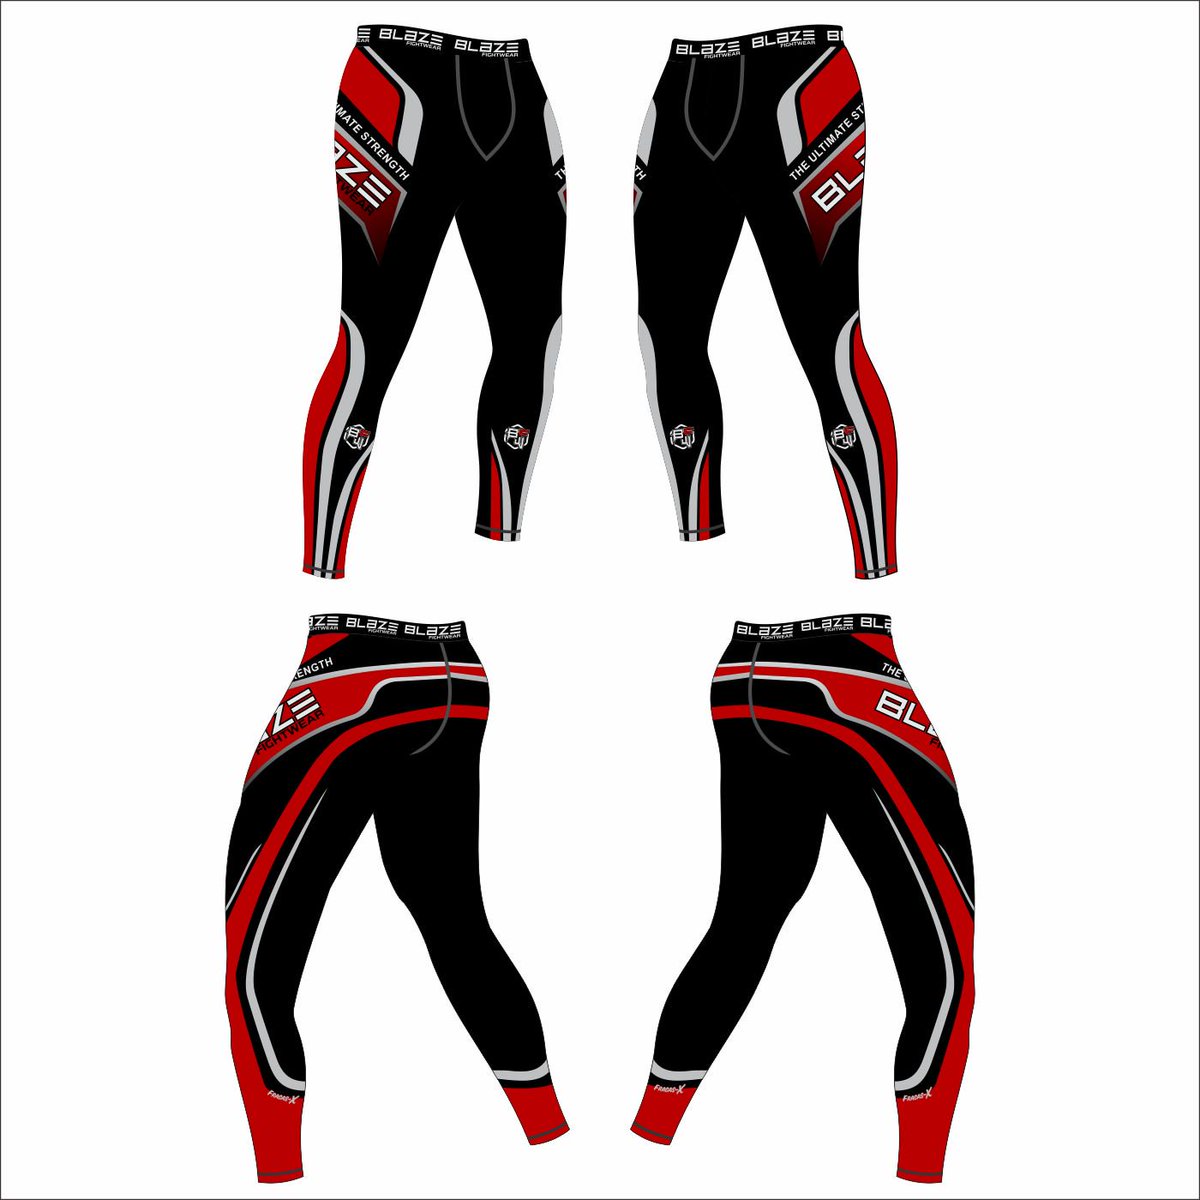 'BLAZE FIGHT WEAR' Compression Trousers. NOW GET WITH YOUR LOGO. #blazefightwear #MMAWEAR #COMPRESSIONWEAR #MENTIGHTS #COMPRESSIONPANT #leggings #MMA #UFC #gymweartoday #gymwearshop #gymwears #compressiontrouser #trainingpants #manufacturer #compressiontights #compressionleggings